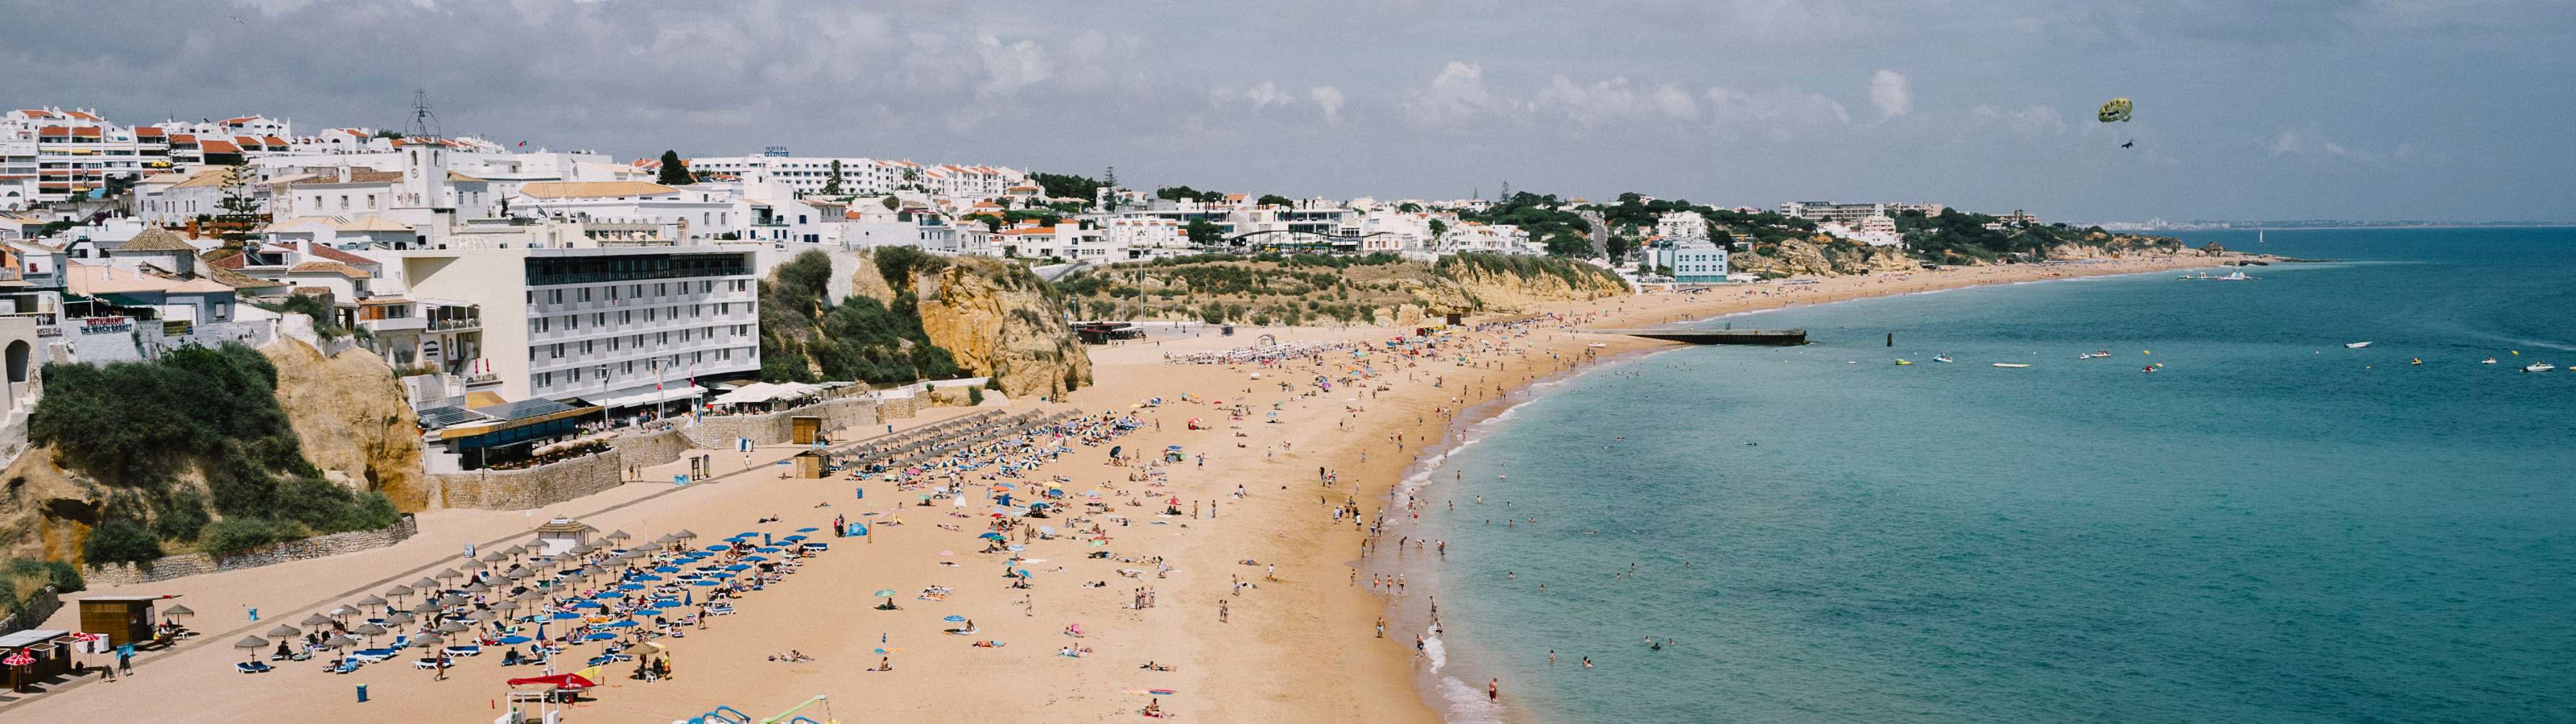 The beautiful white sands of Albufeira next to turqoise waters on a clear summer's day.